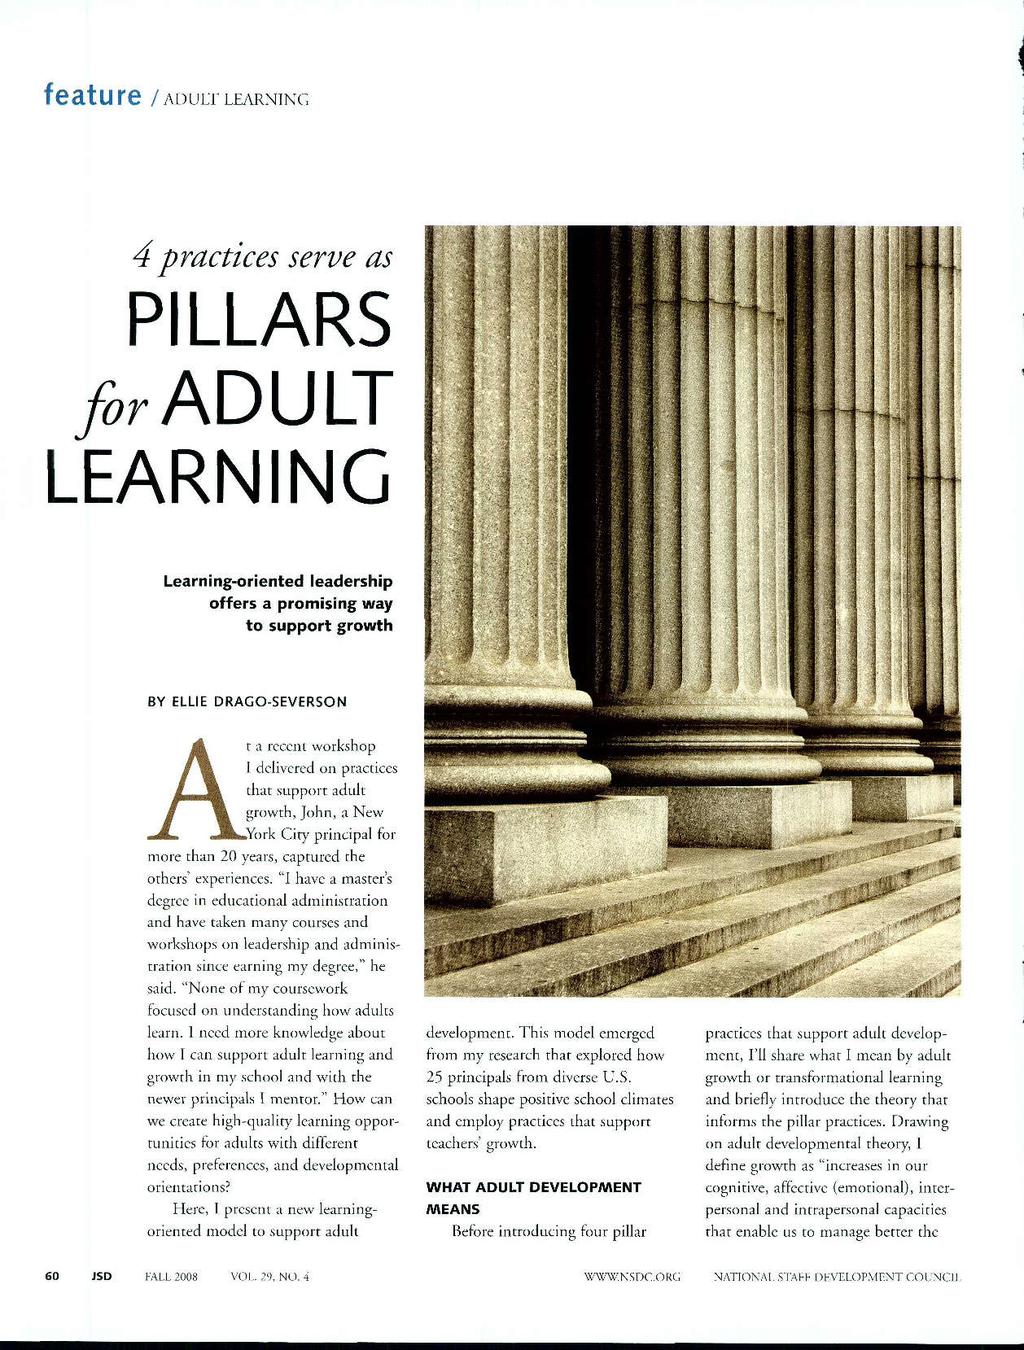 featu re / ADULT LEARNING I 4practices serve as PILLARS for ADU LT LEARNING Learning-oriented leadership offers a promising way to support growth BY ELLIE DRAGO-SEVERSON agyt that a support adult I